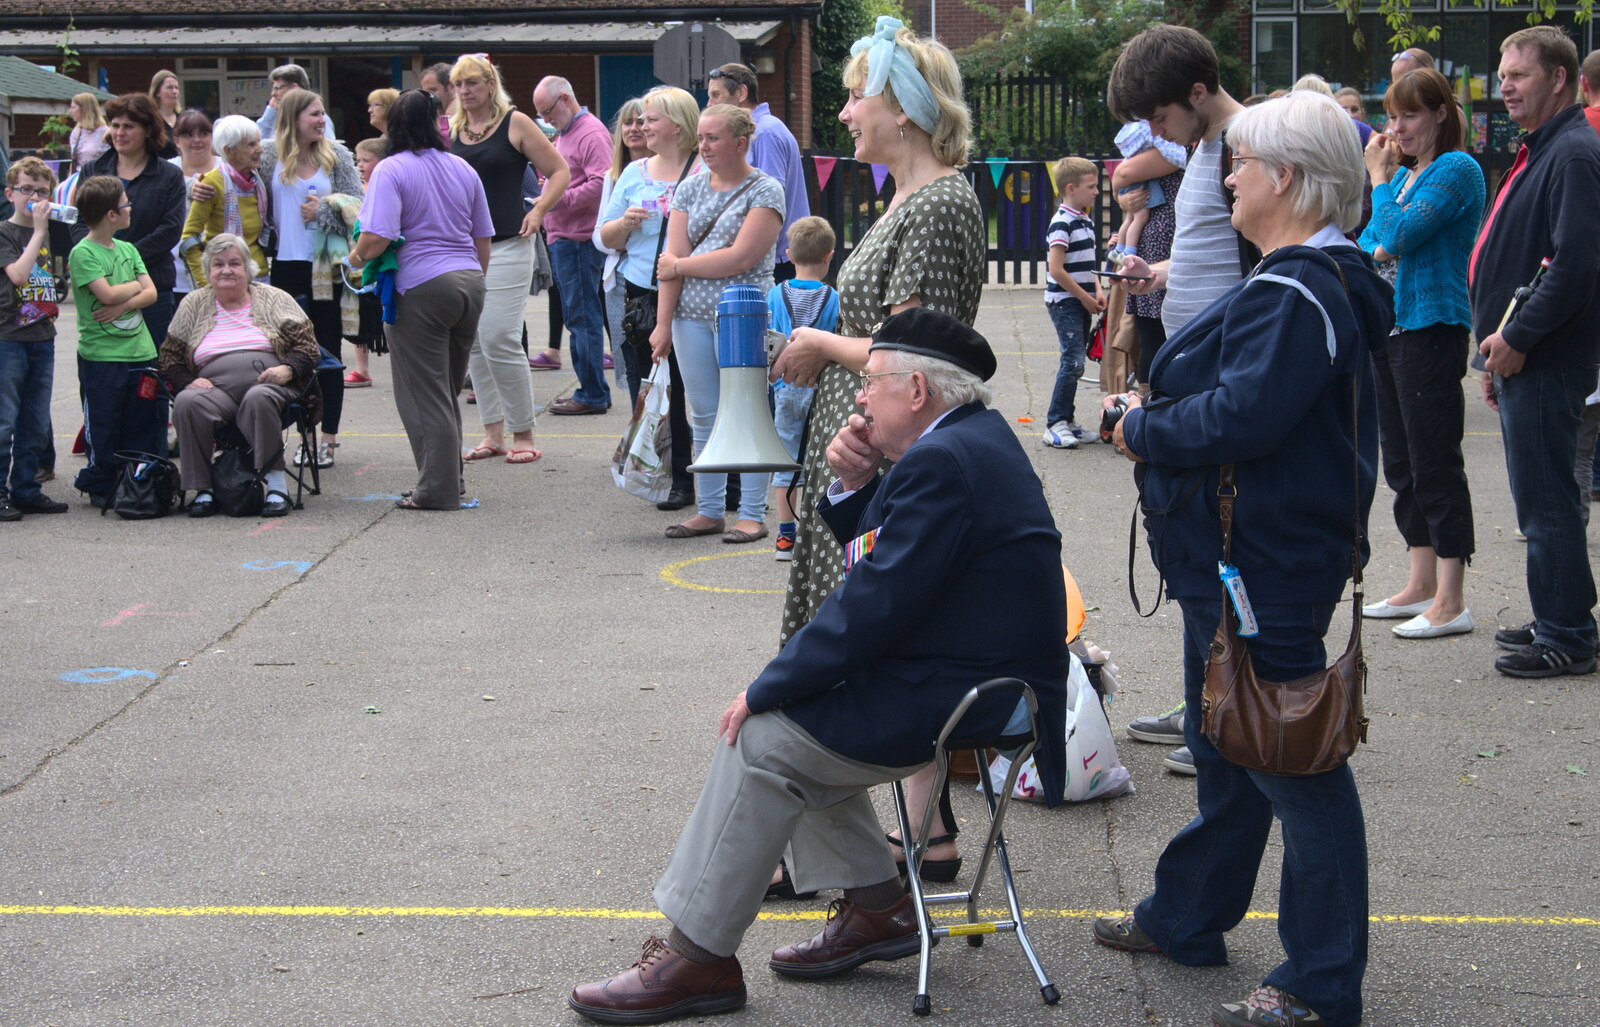 Alan King, local veteran, watches proceedings from St. Peter and St. Paul's School Summer Fete, Eye, Suffolk - 12th July 2014